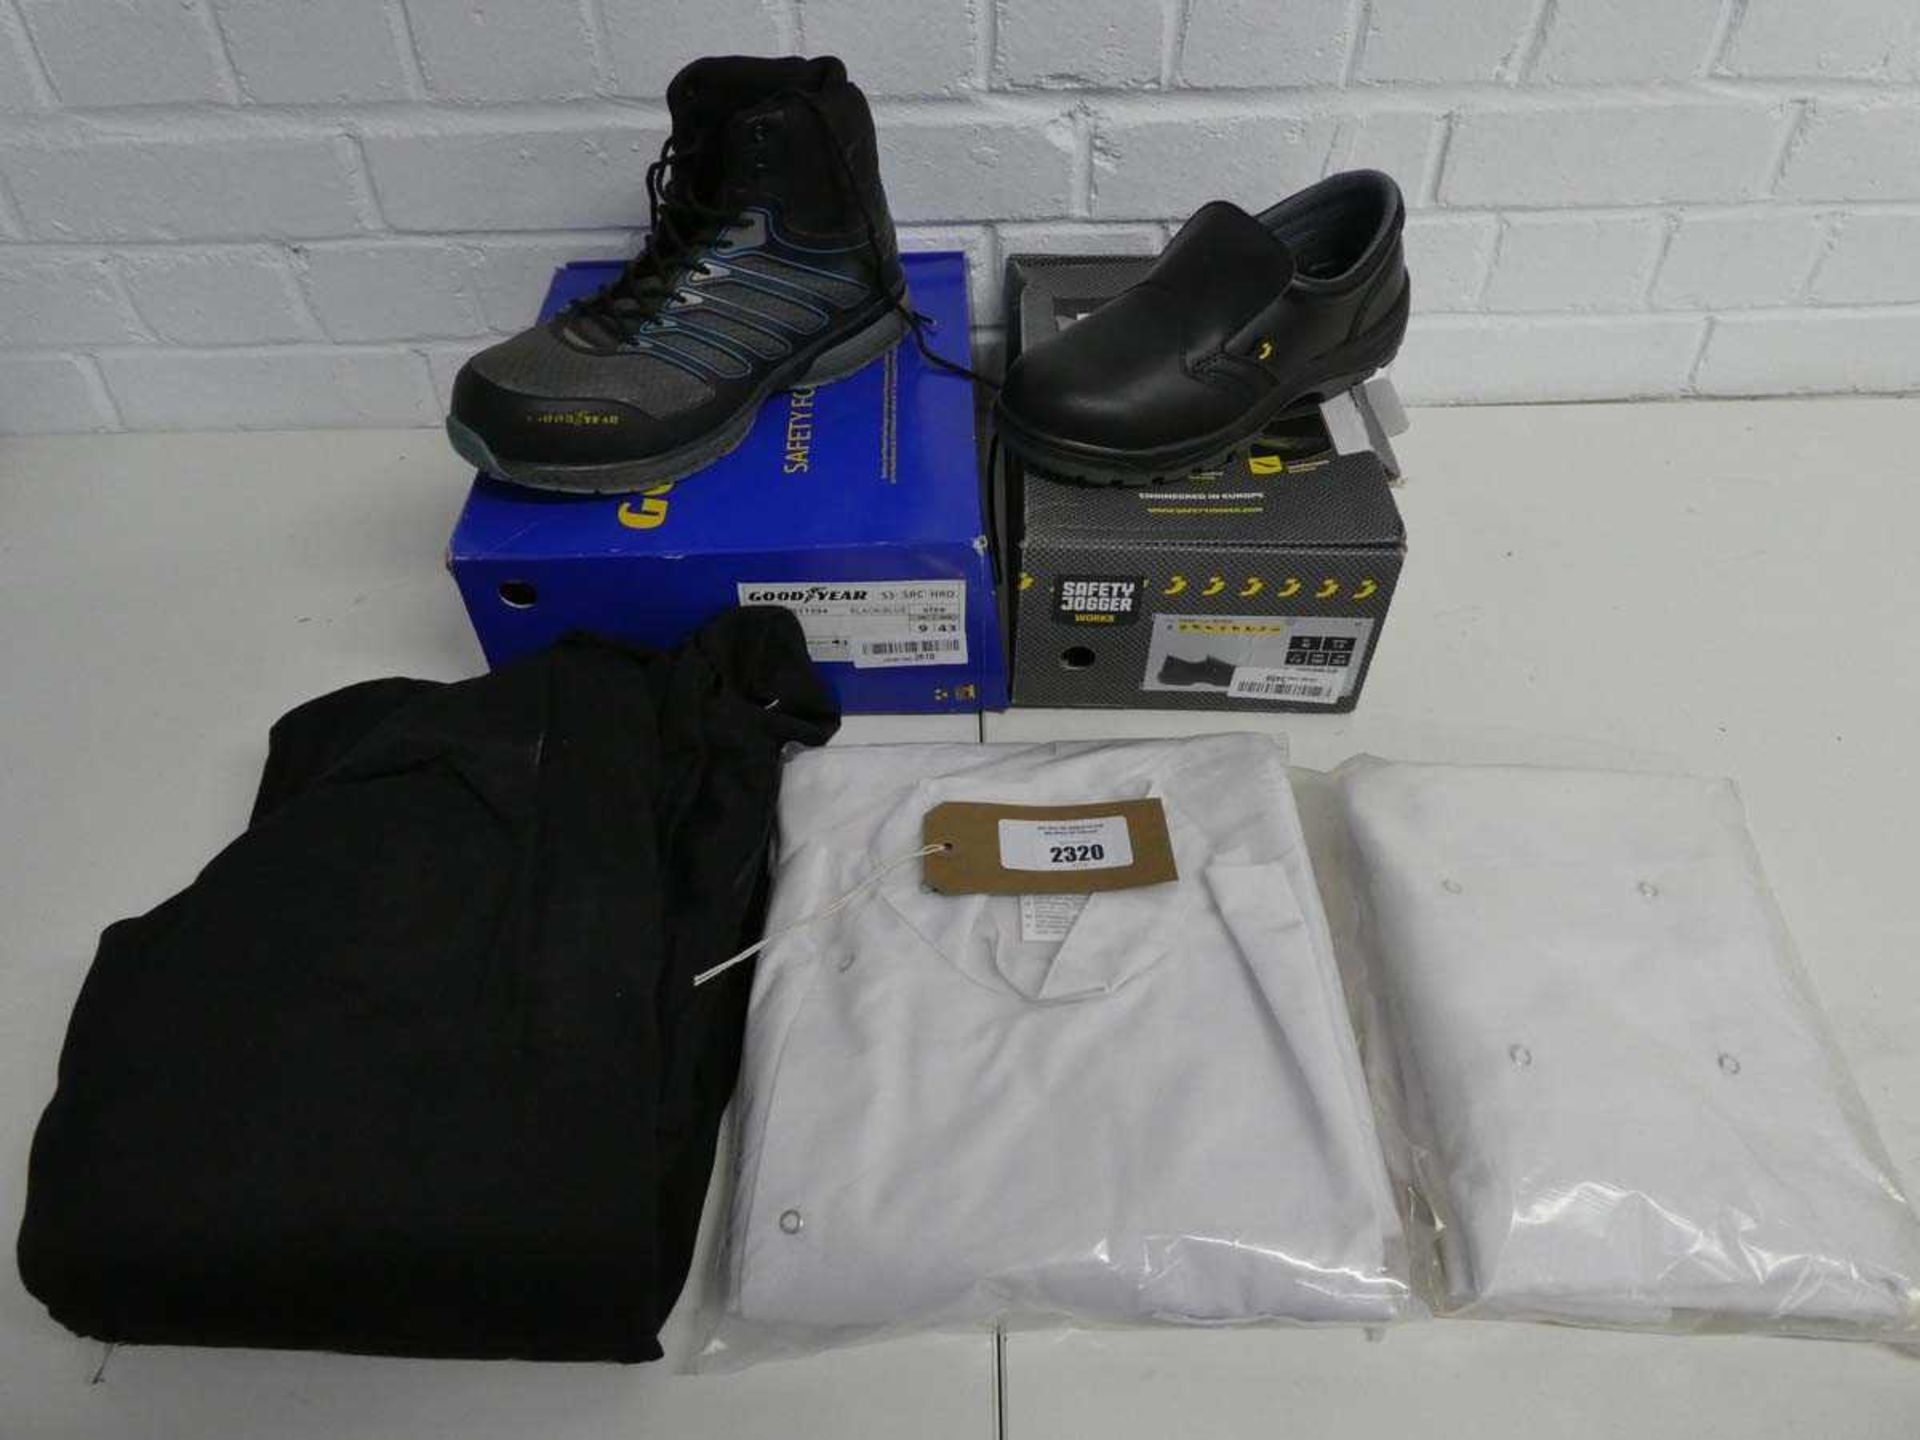 +VAT Quantity of various work wear incl. pair of Goodyear steel toe safety boots in black and